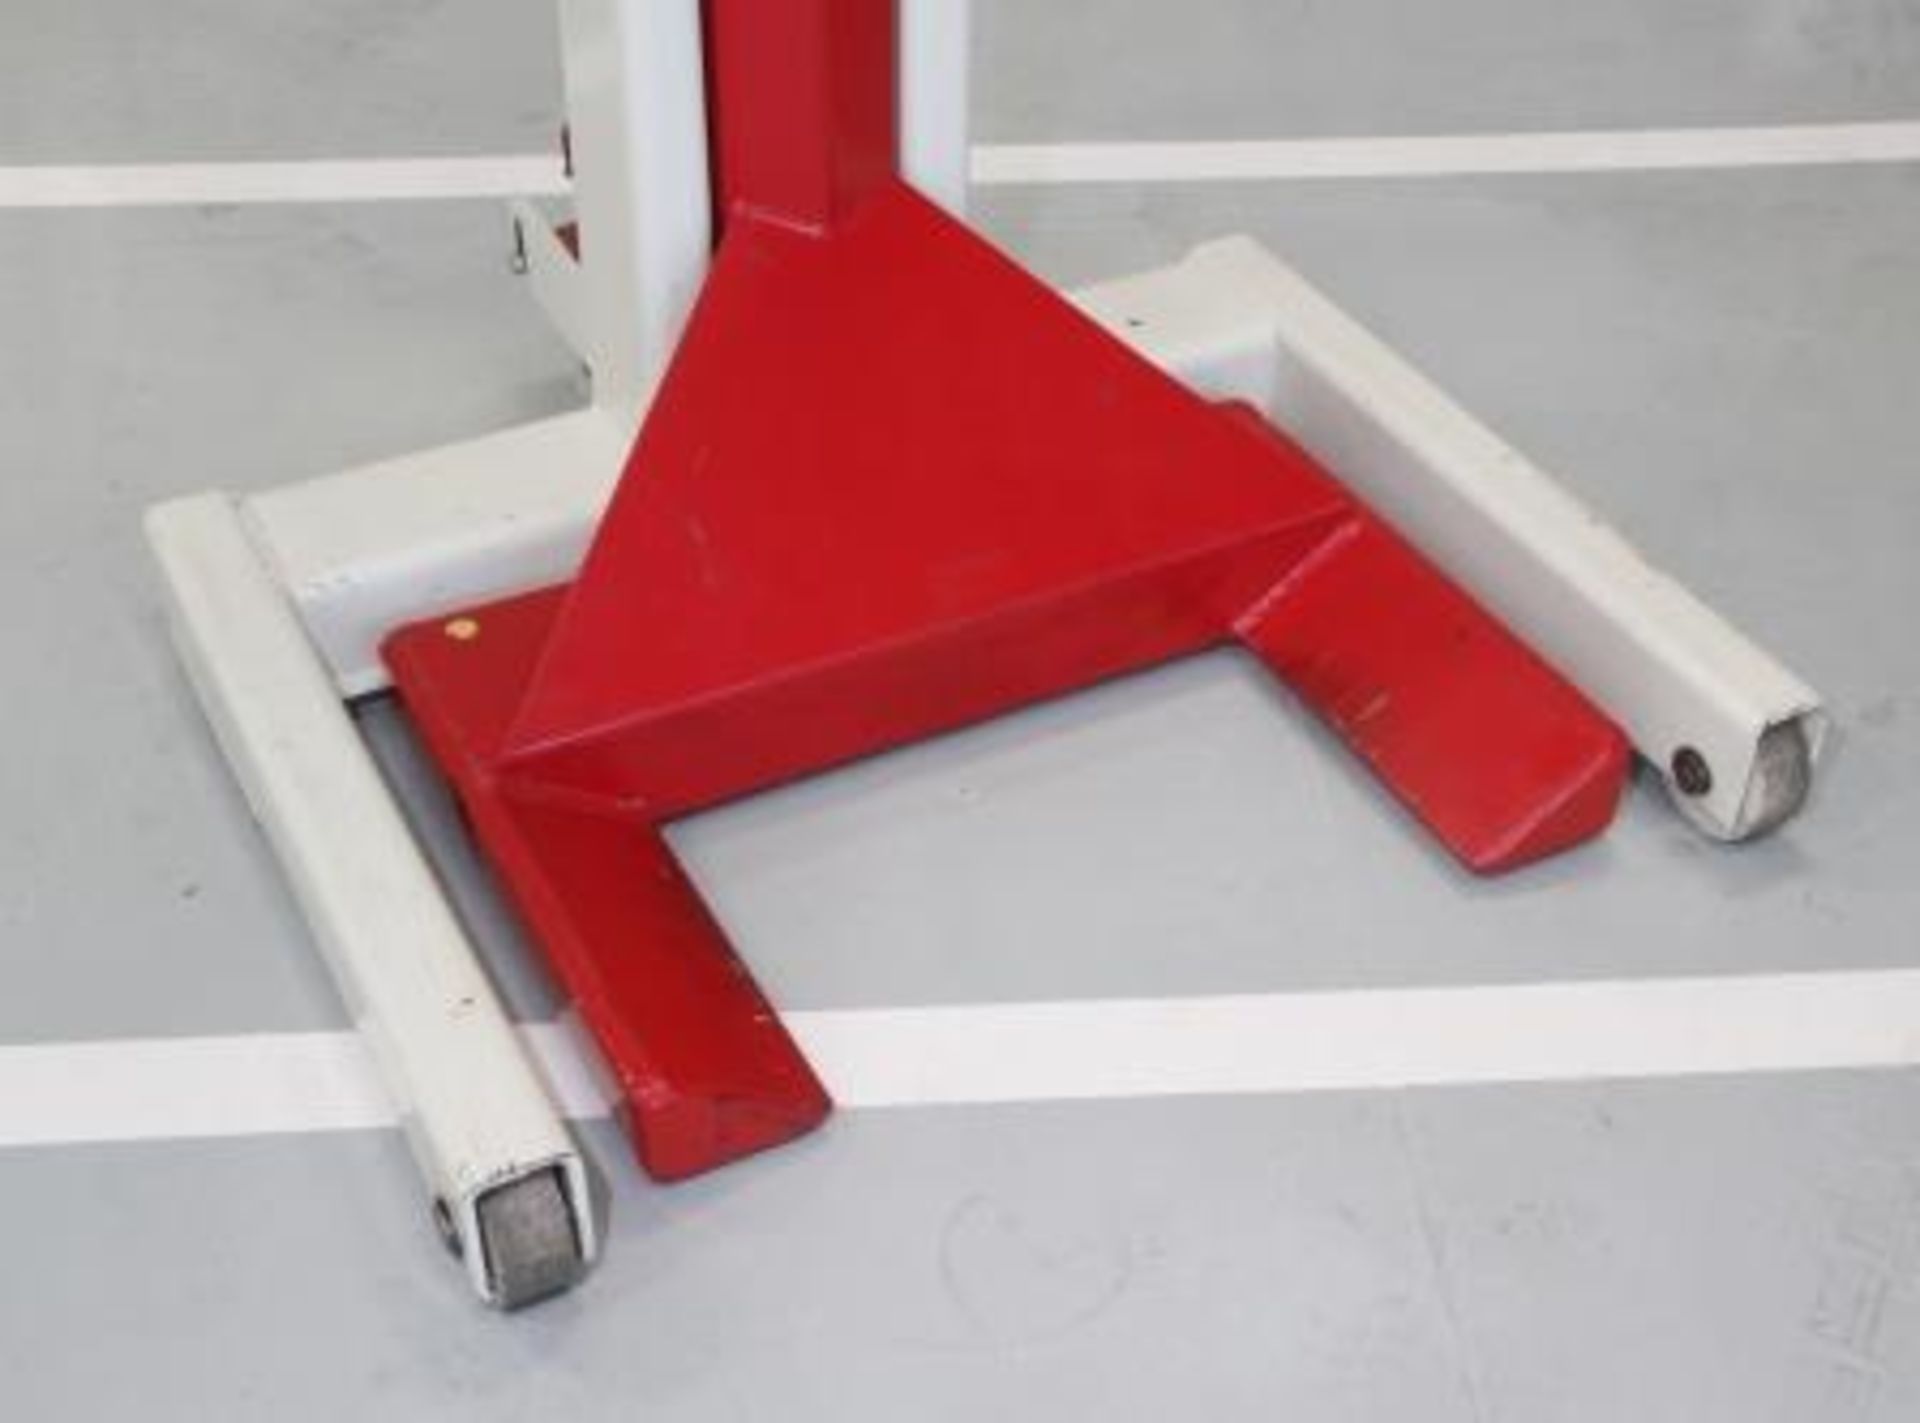 Stertil Koni Mobile Column Lifts (Cabled) - Image 6 of 20